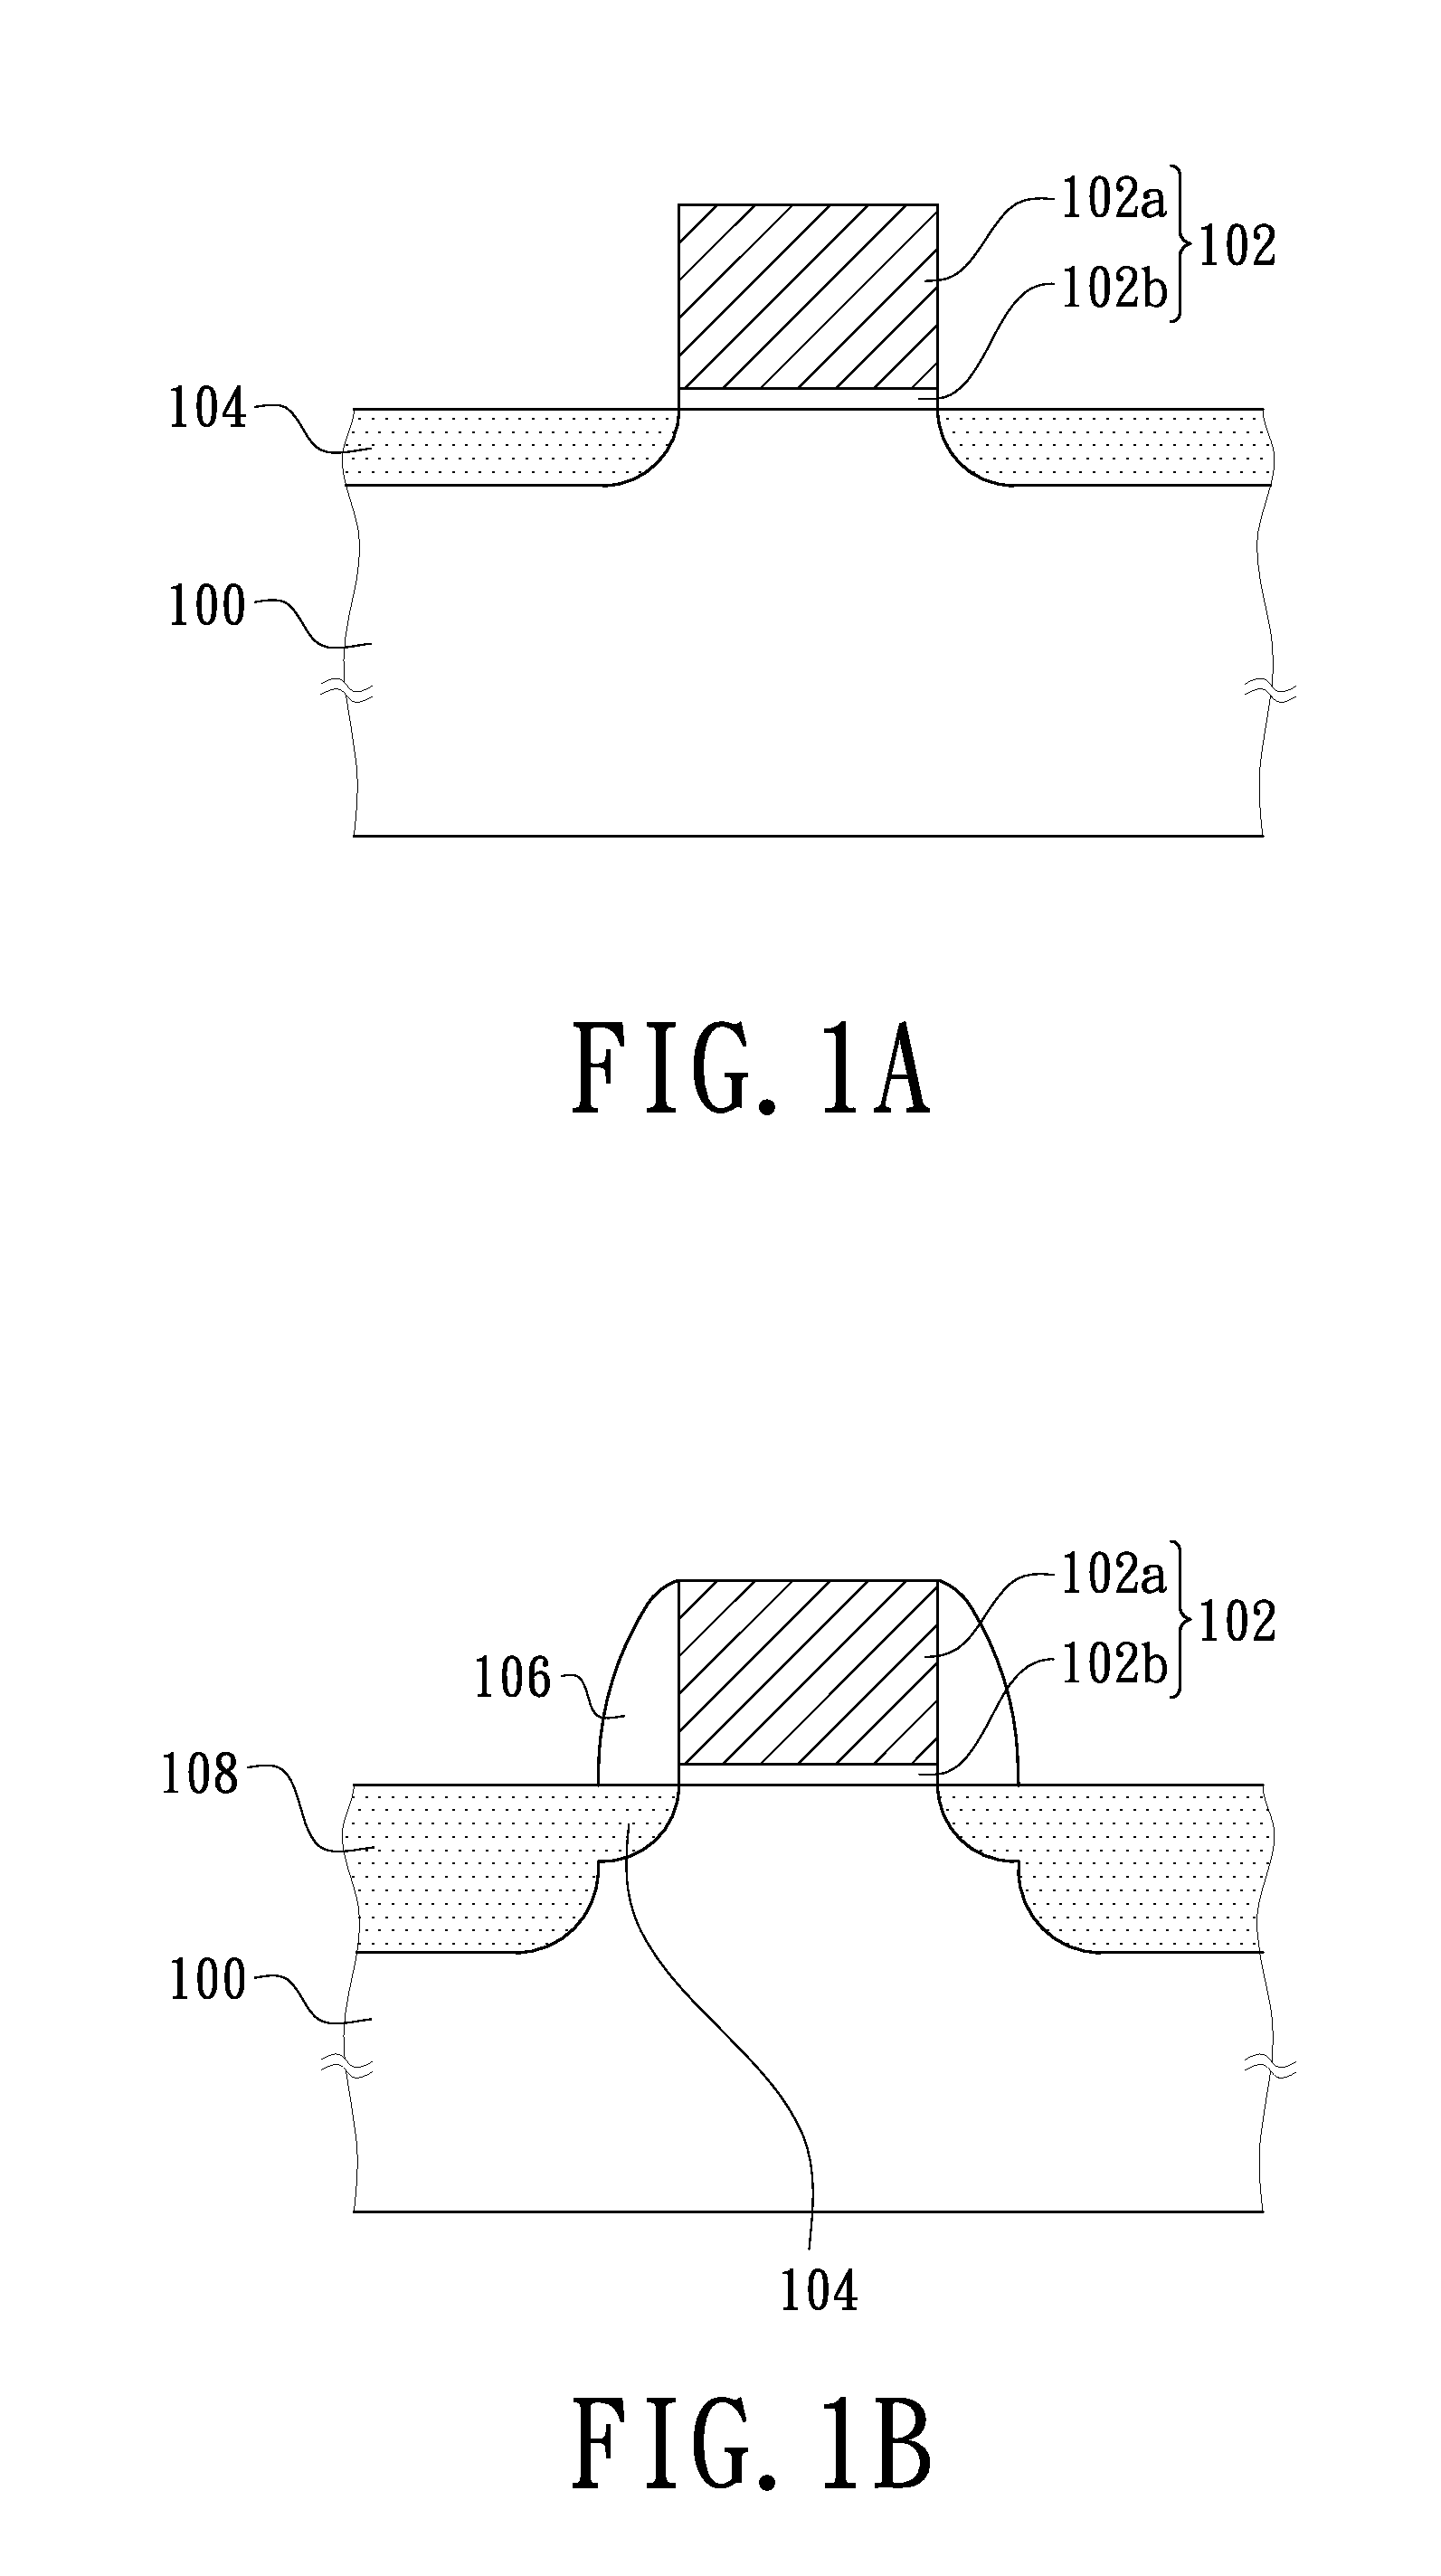 Semiconductor device with carbon atoms implanted under gate structure